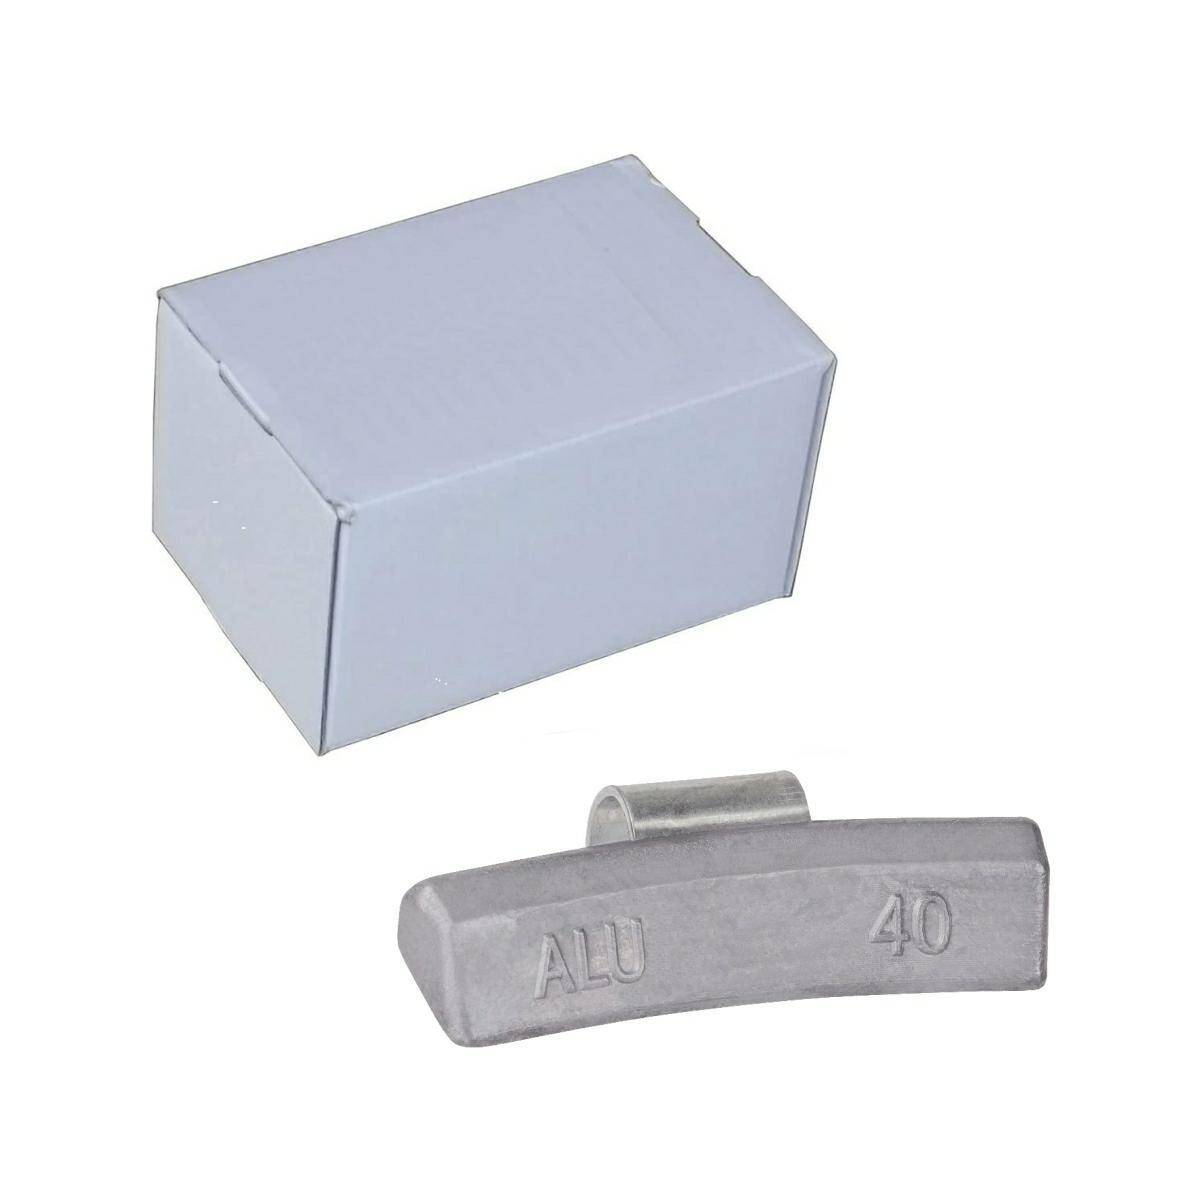 Lead stud weight ALU AT Type 608 60g (Pb) - pack of 50 (H608-60AT)